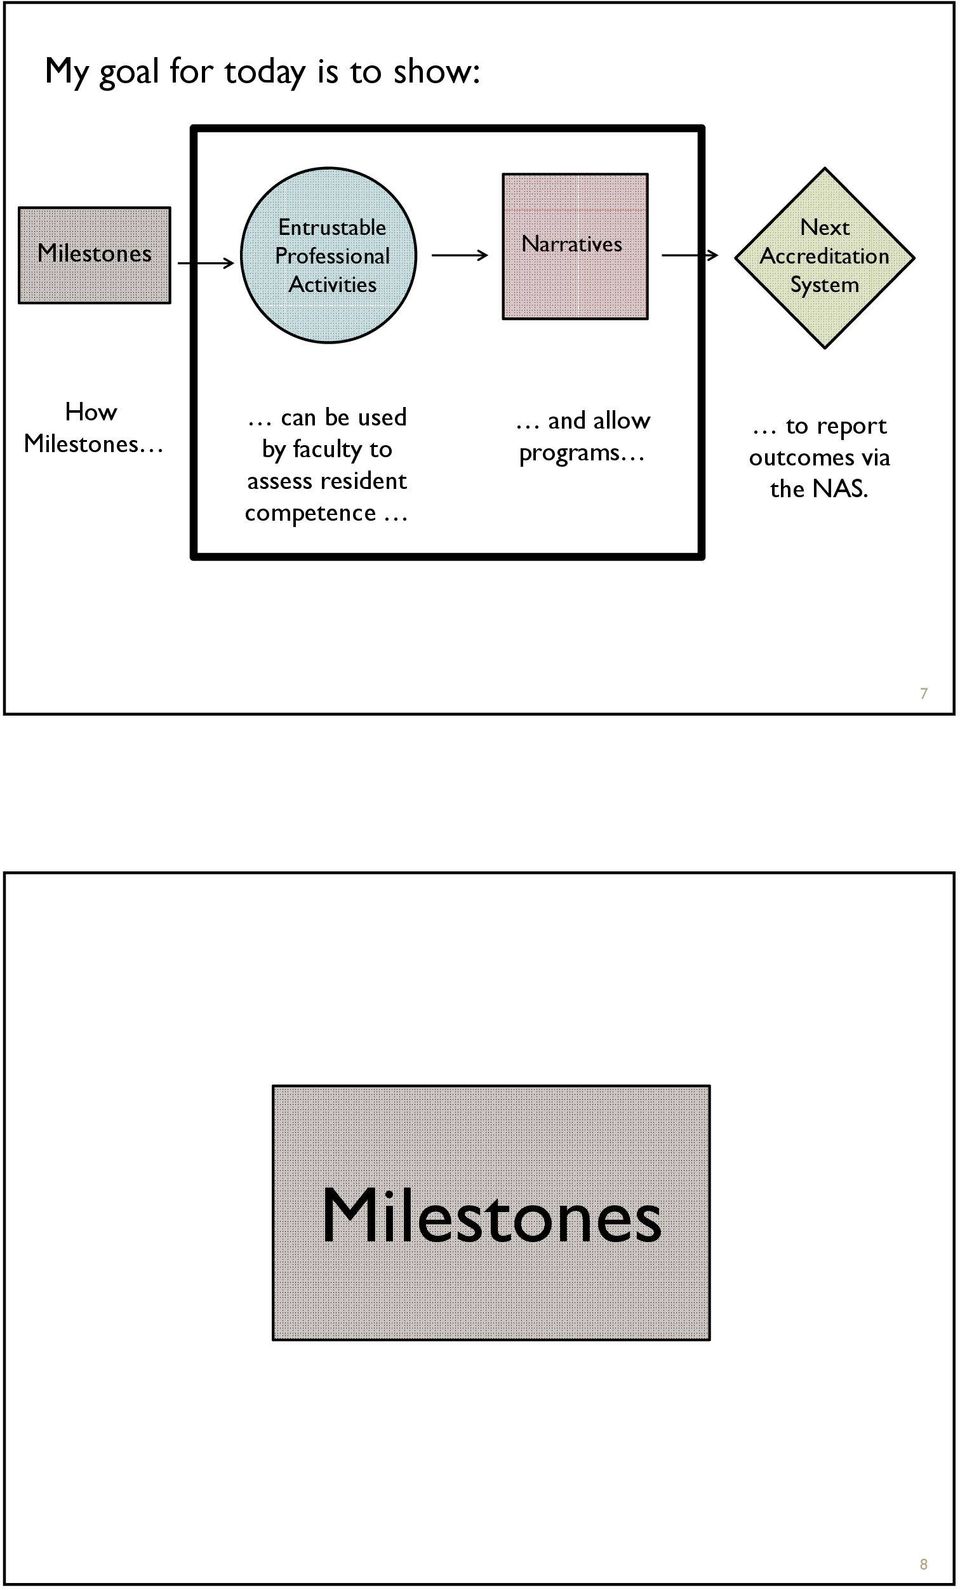 How Milestones can be used by faculty to assess resident